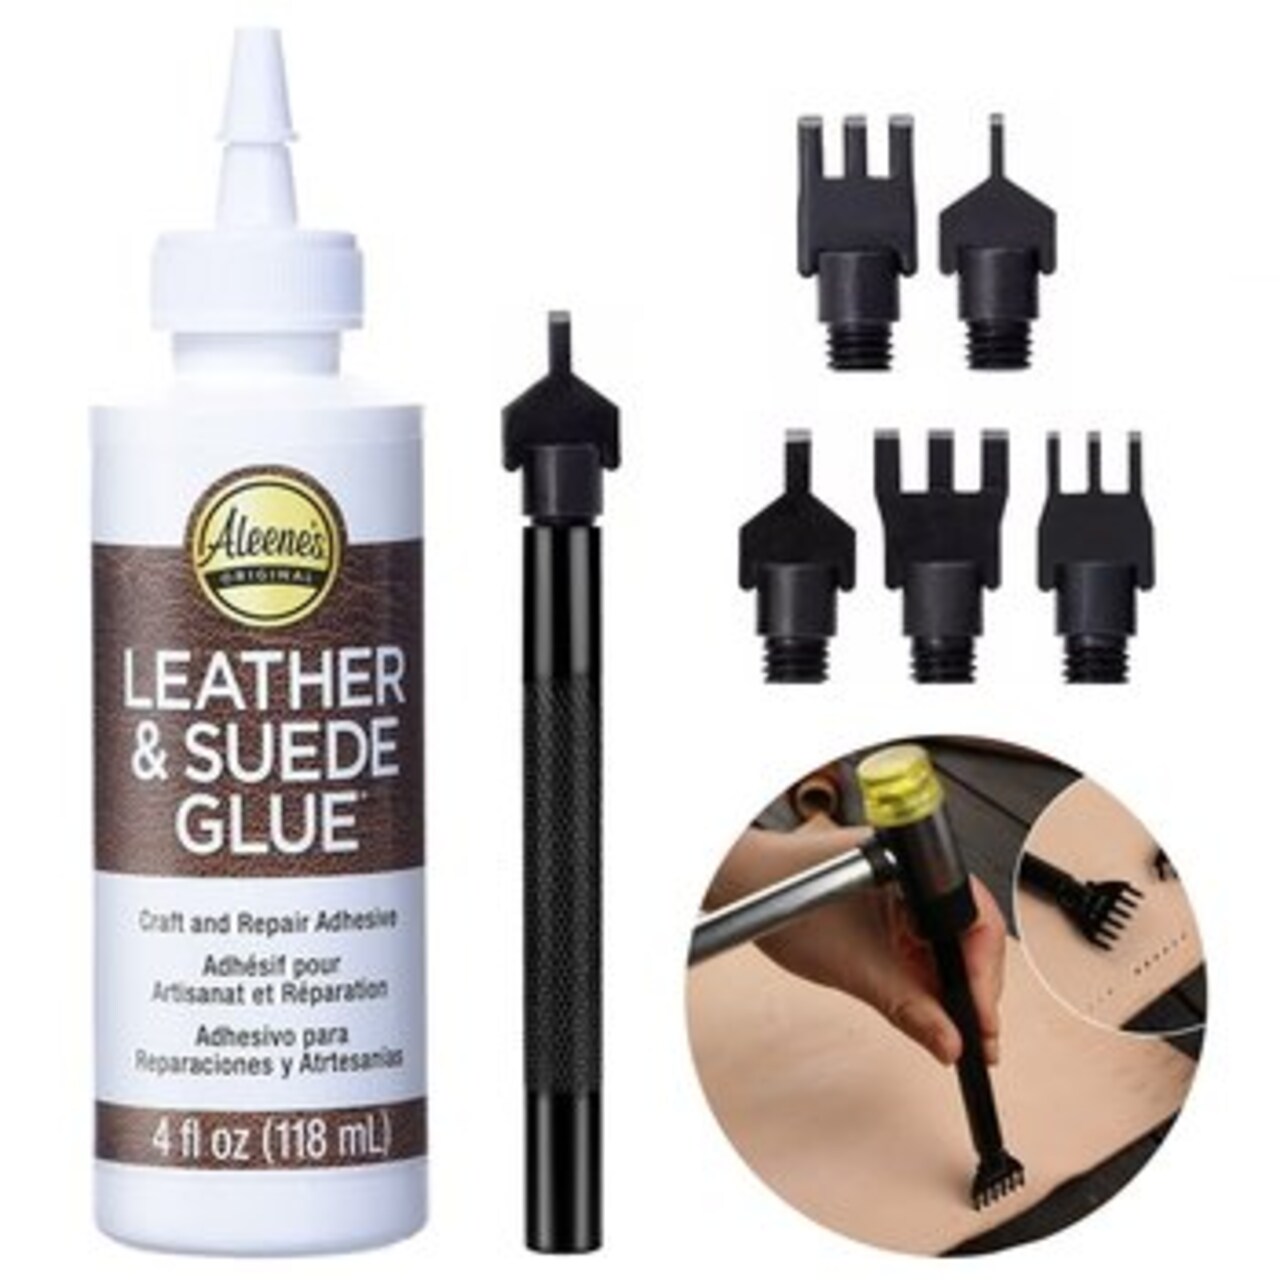 Leather Glue Adhesive - Aleenes Leather Fabric Glue for Patches